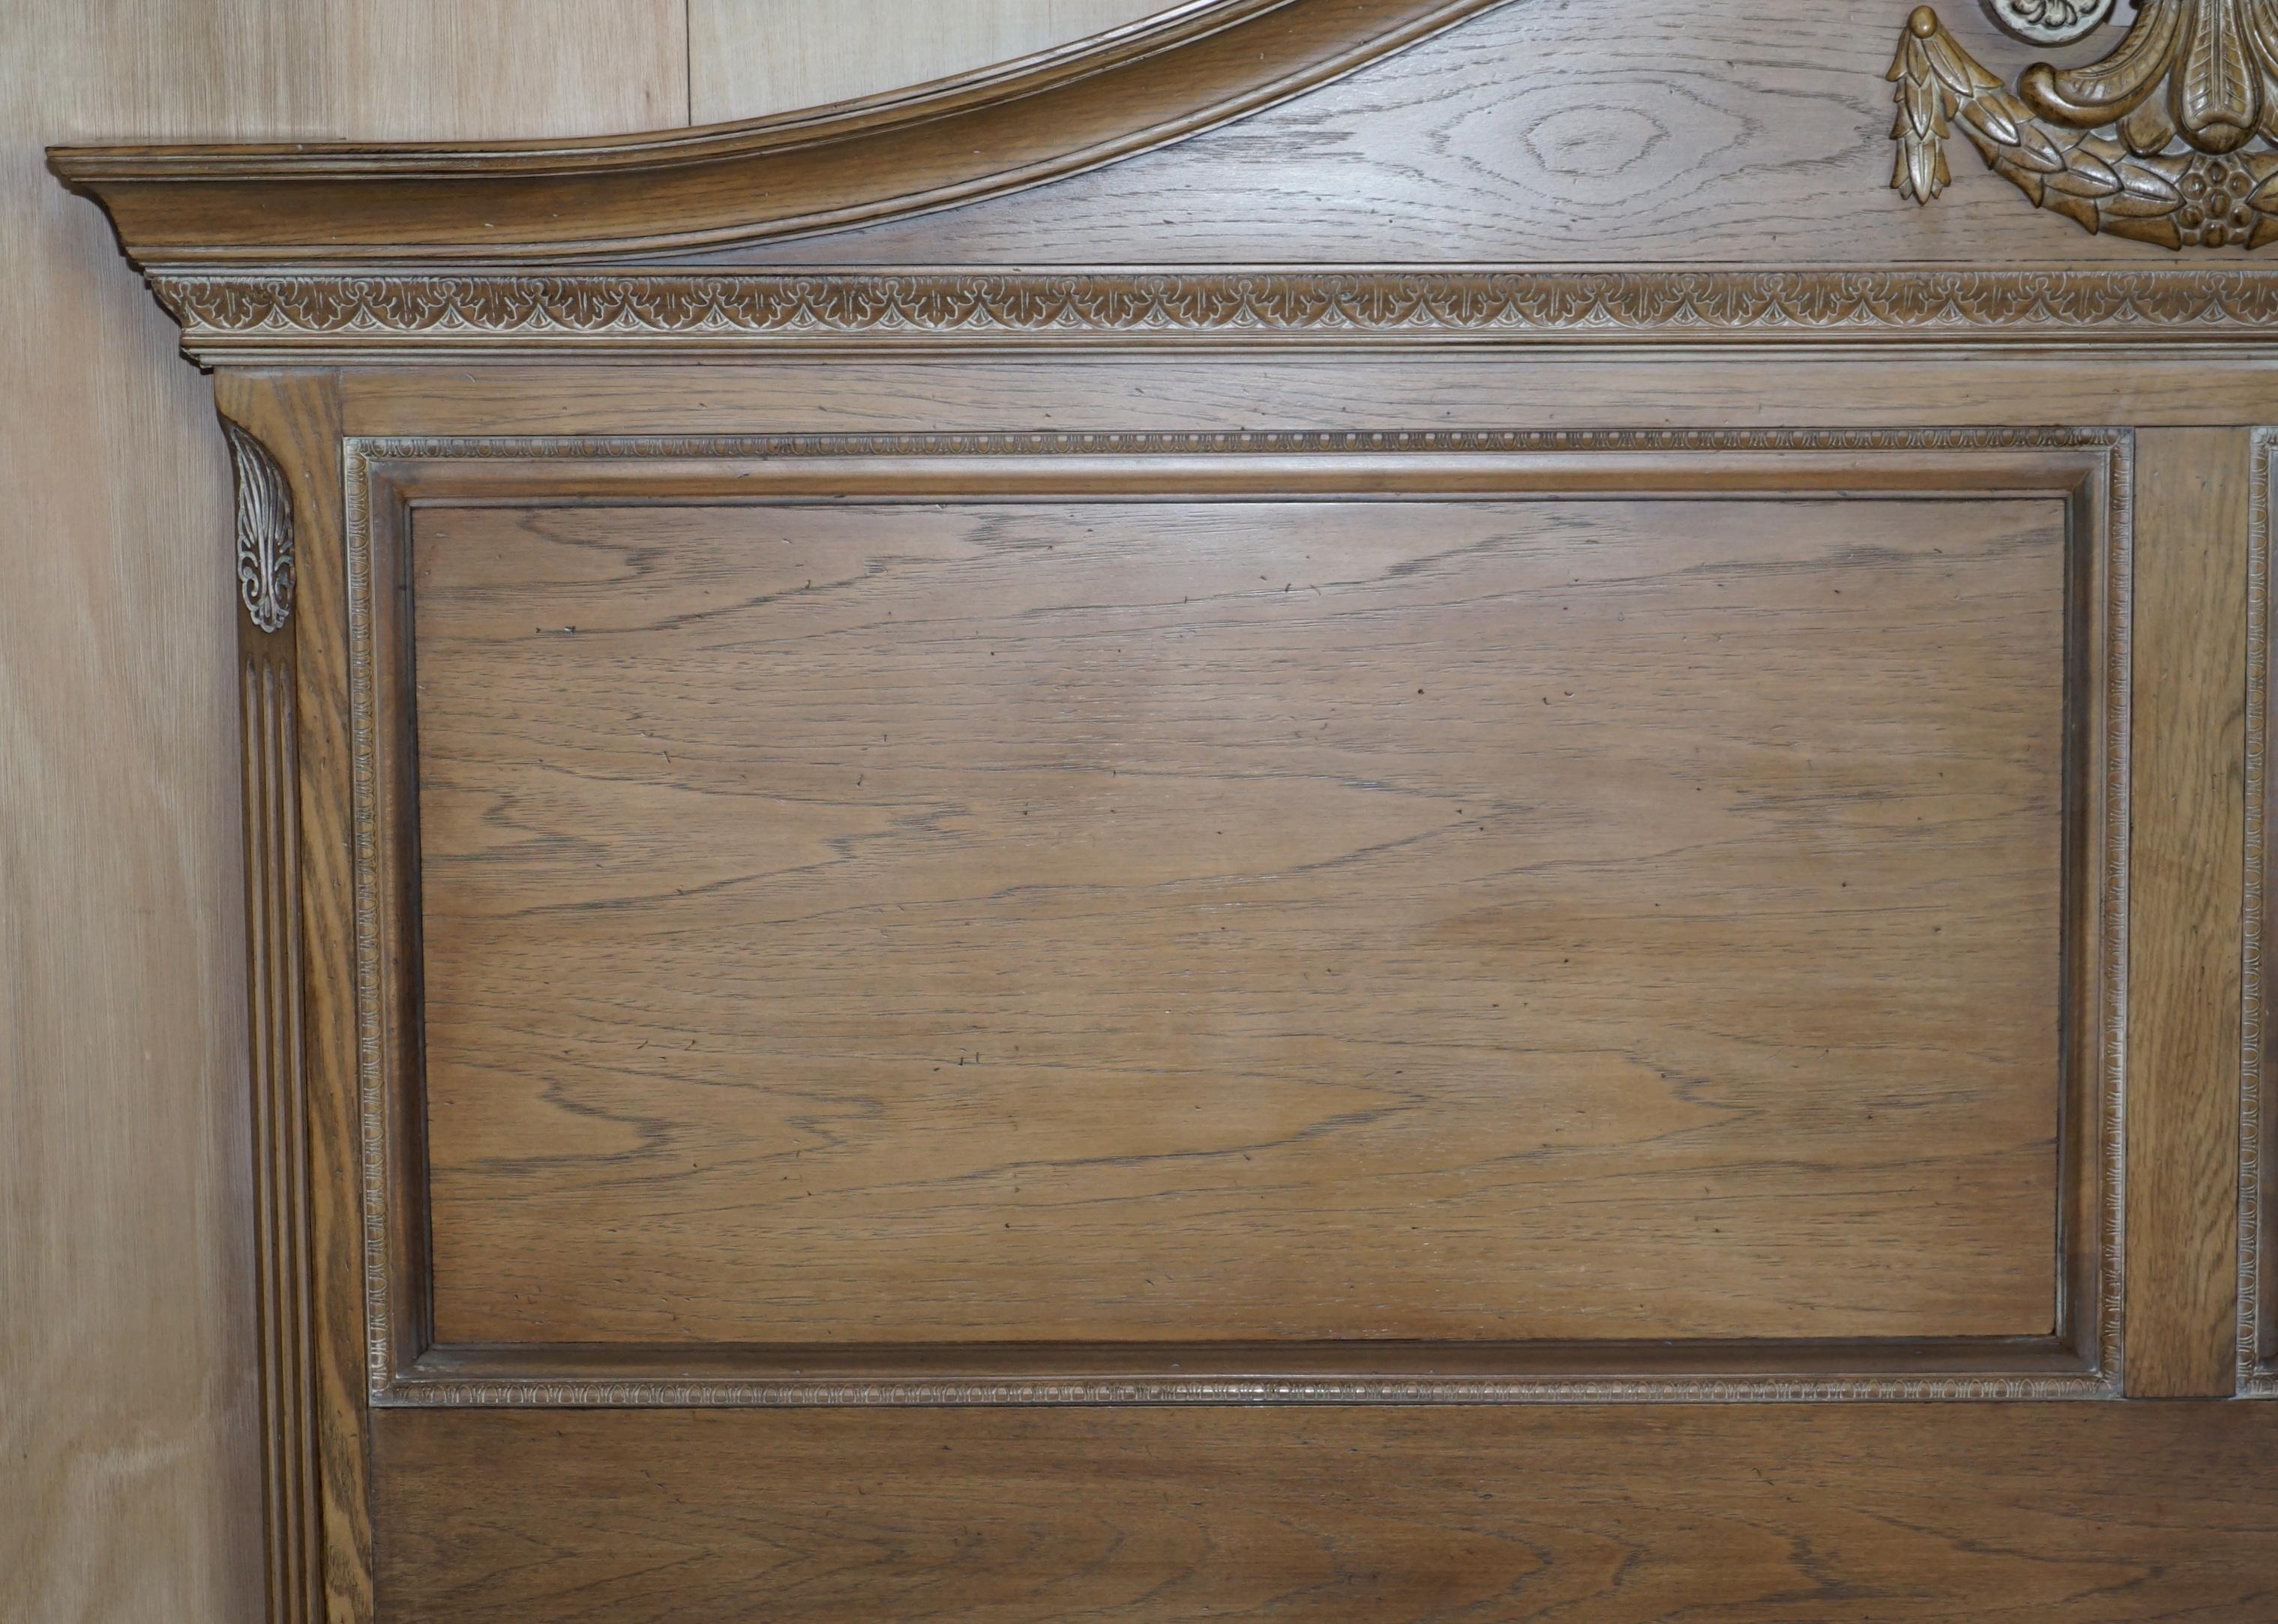 Victorian Limed Oak Super King Size Headboard with Prince Charles Flur De Lis Feathers For Sale